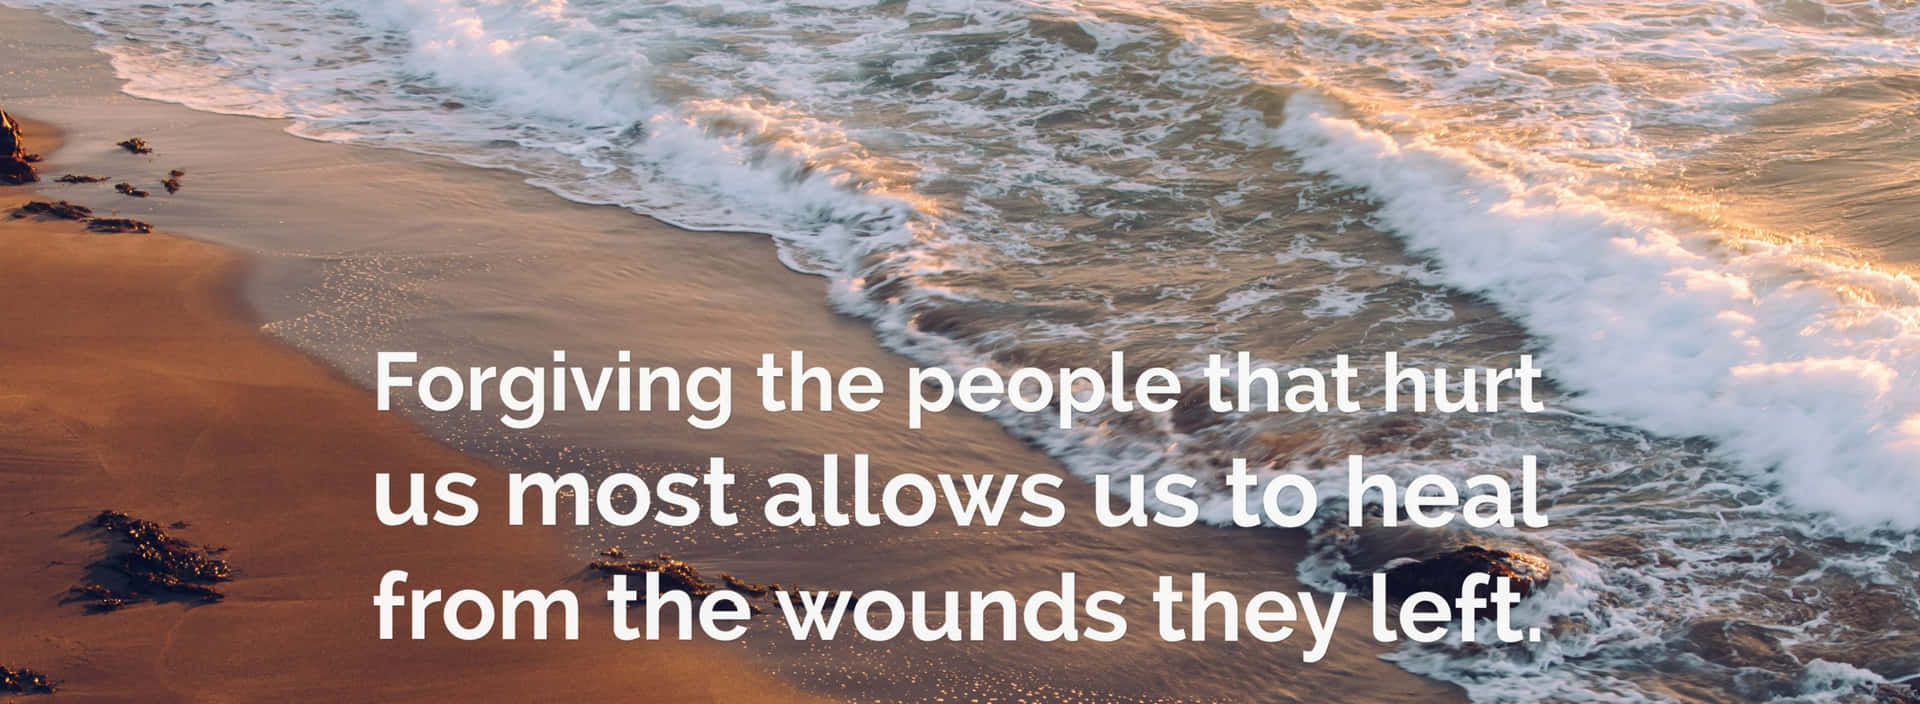 Forgiveness The People That Hurt Most Allows Us To Heal From The Wounds They Left